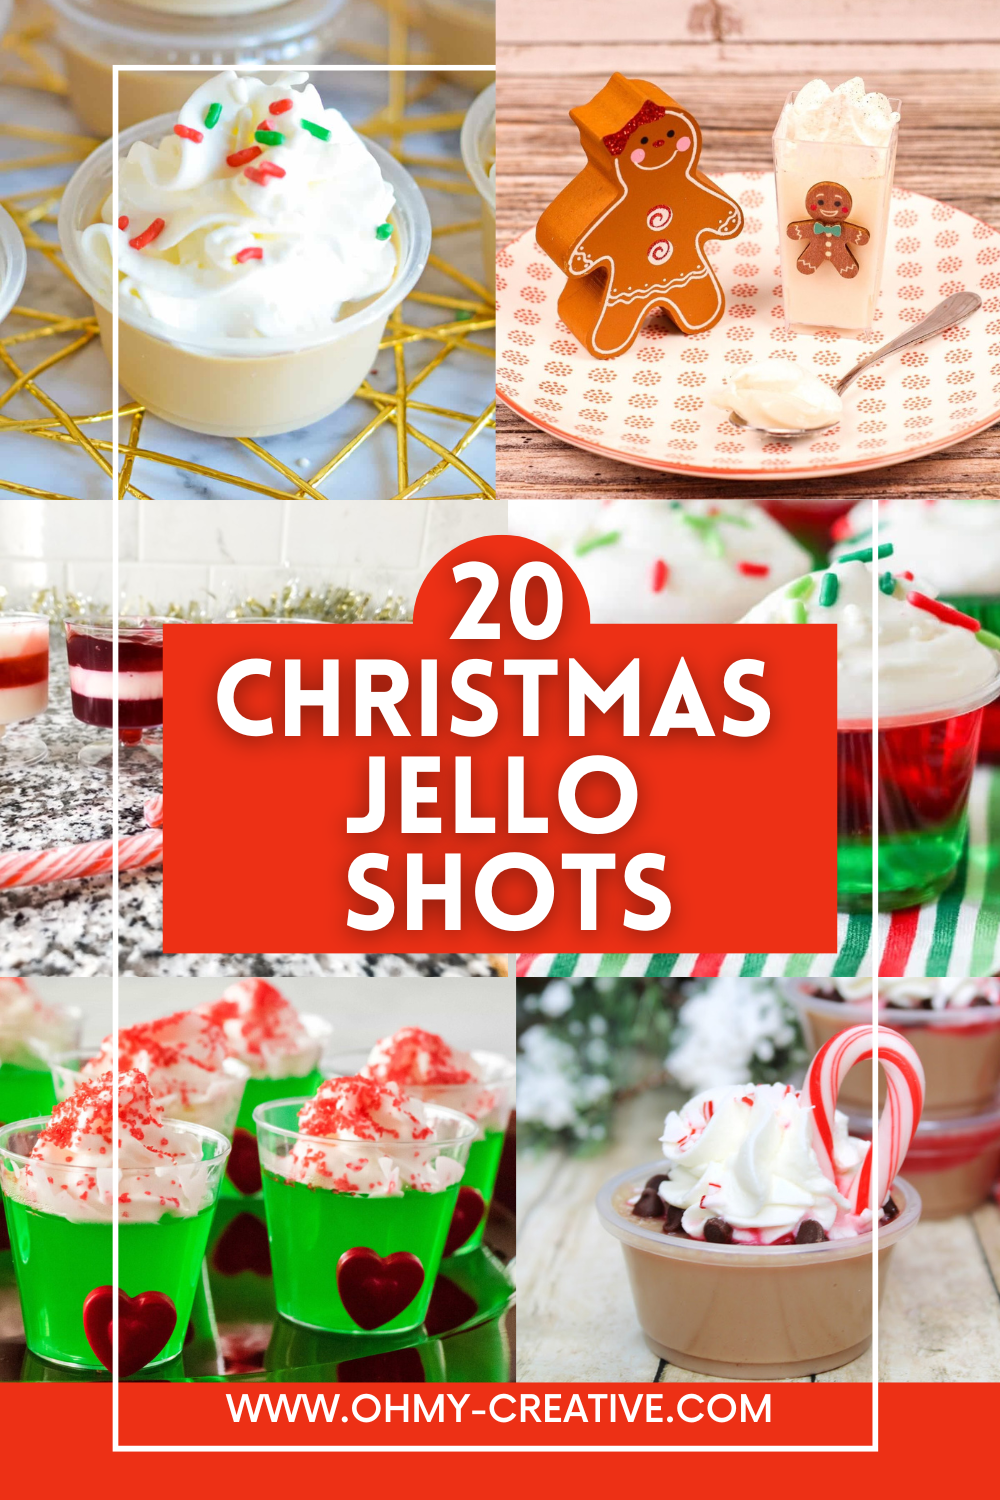 Get in the Holiday Spirit with Festive These Christmas Jello Shots